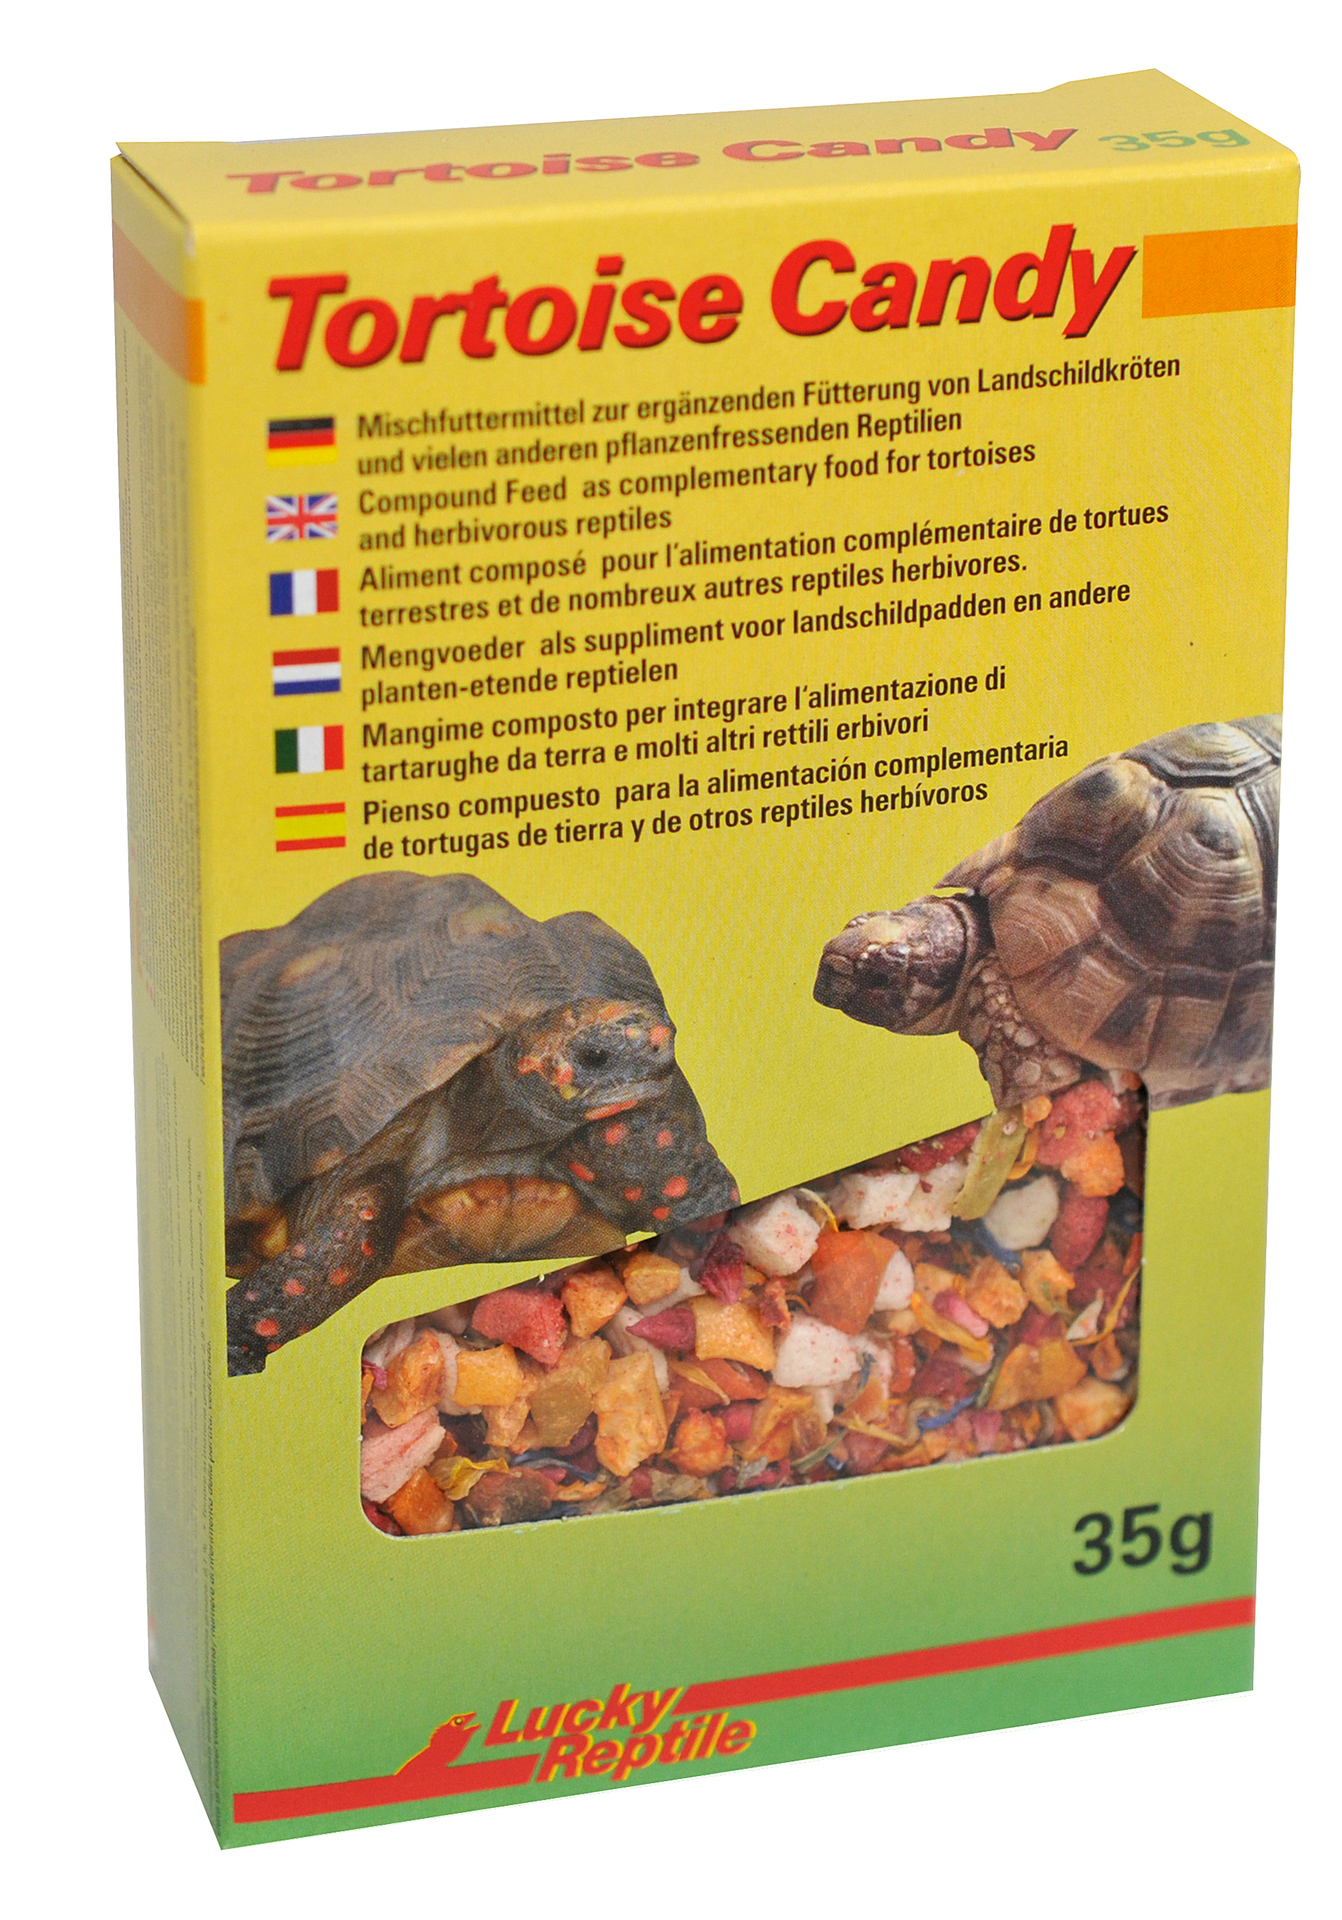 Import-Export Peter Hoch GmbH Tortoise Candy